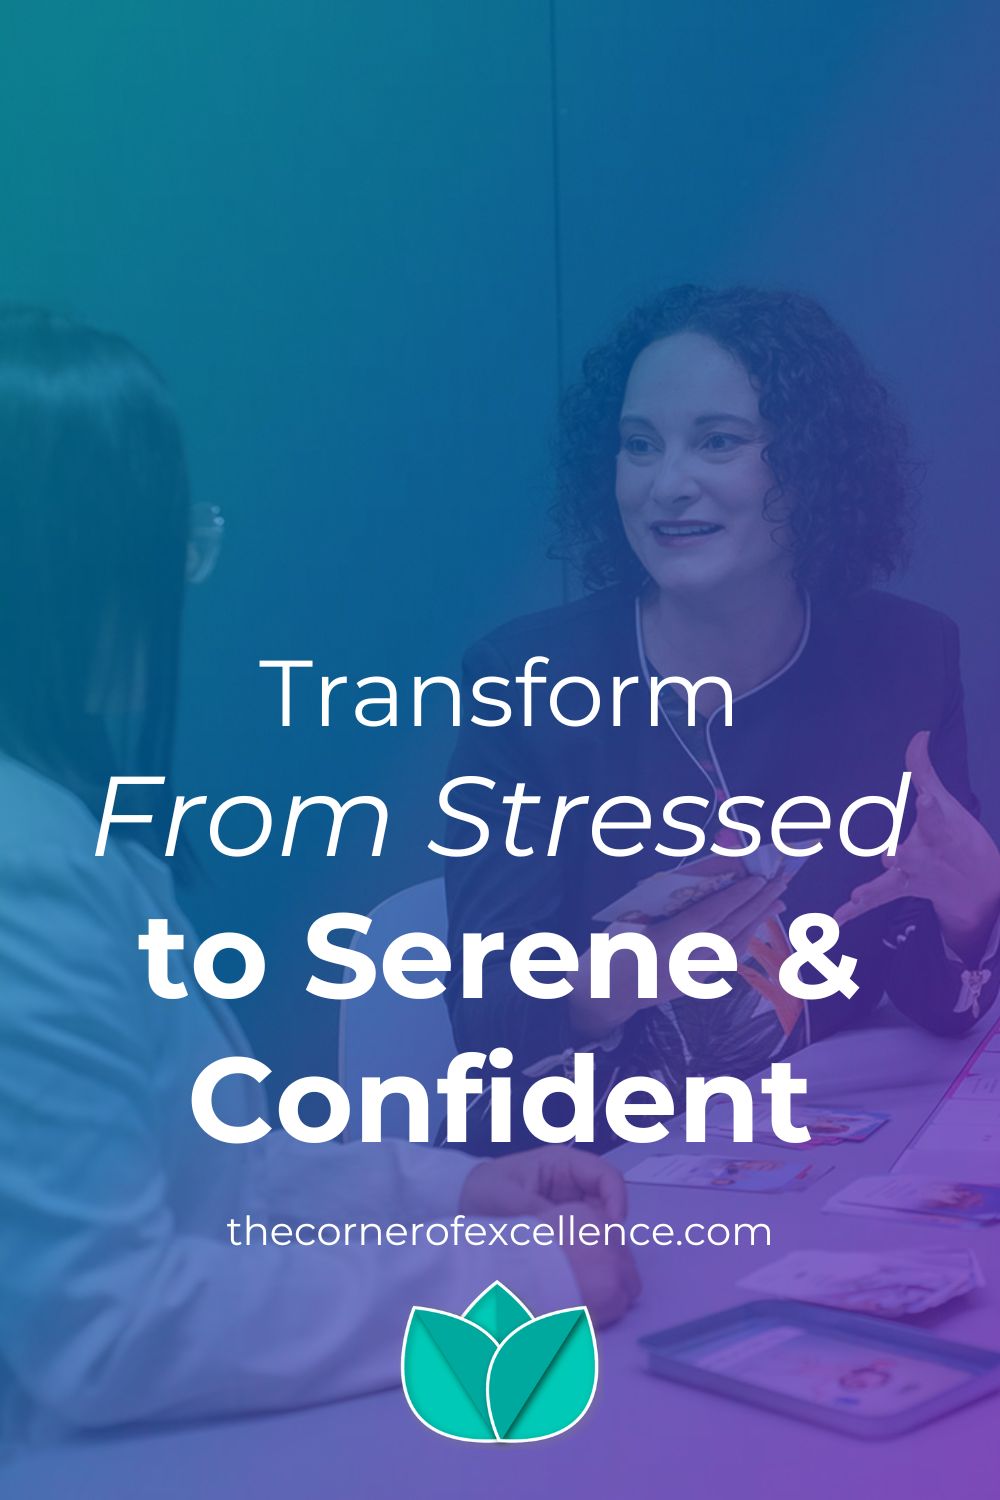 Transform From Stressed to Serene & Confident stress relief self-confidence serenity